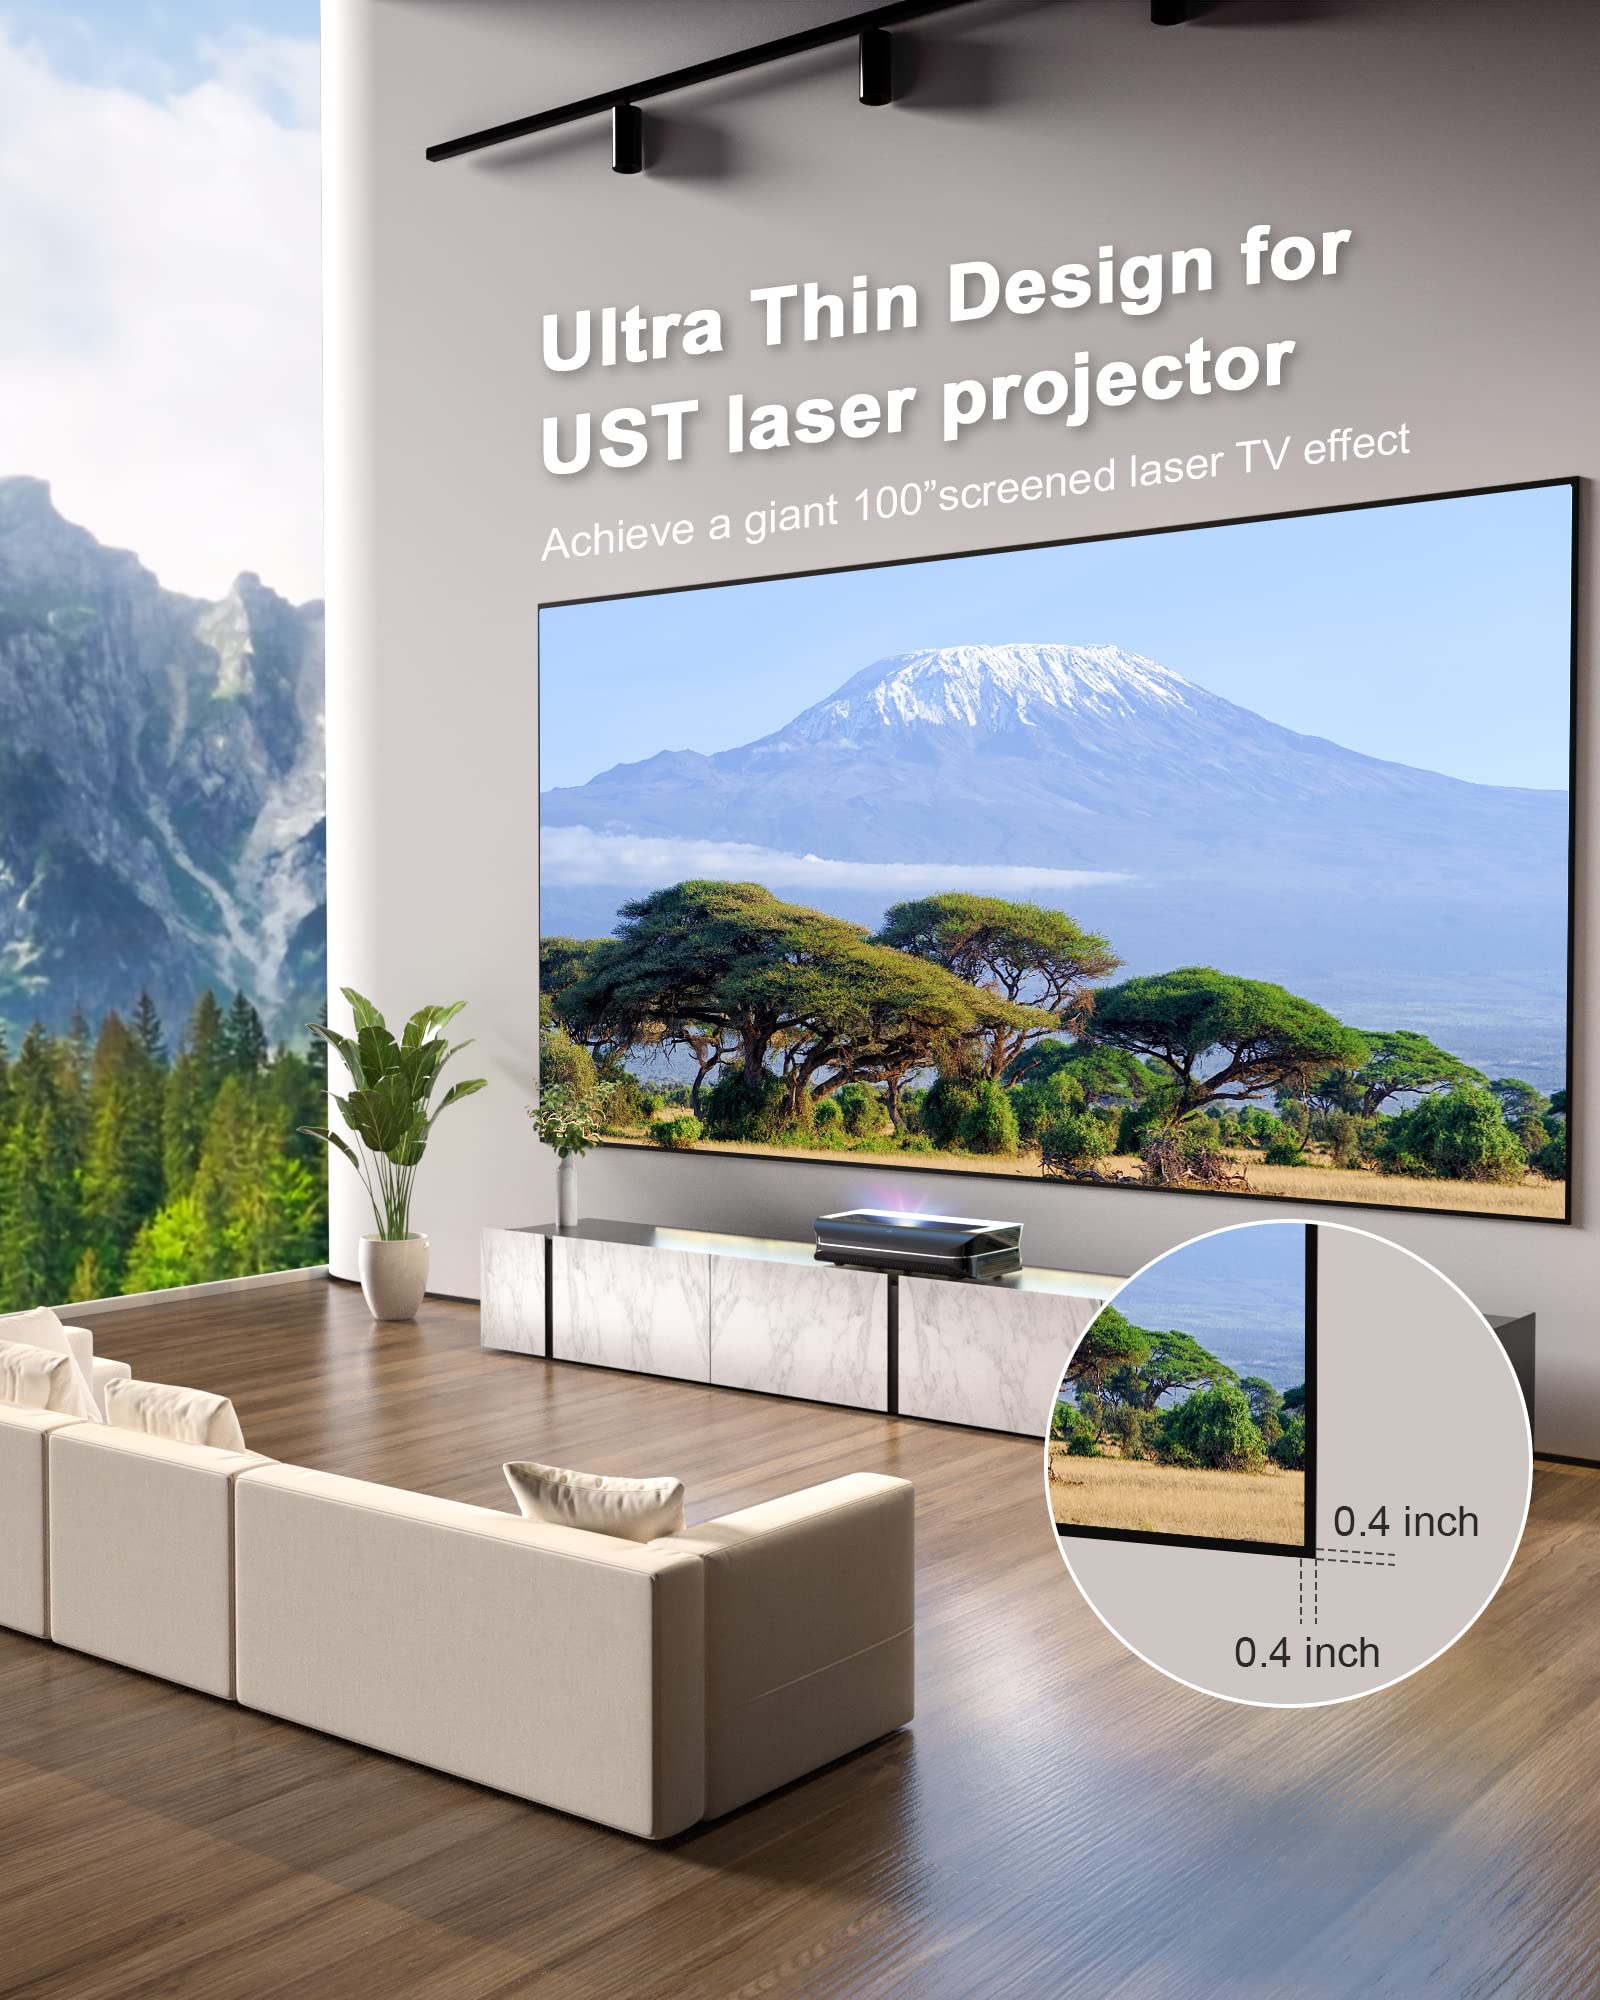 AWOL VISION 100" UST Projector Screen for Bright Day Light Using, 85% Ambient Light Rejecting (ALR) Fresnel Projector Screen for Ultra Short Throw Projector, Fixed Frame, Active 3D, HDR -D100